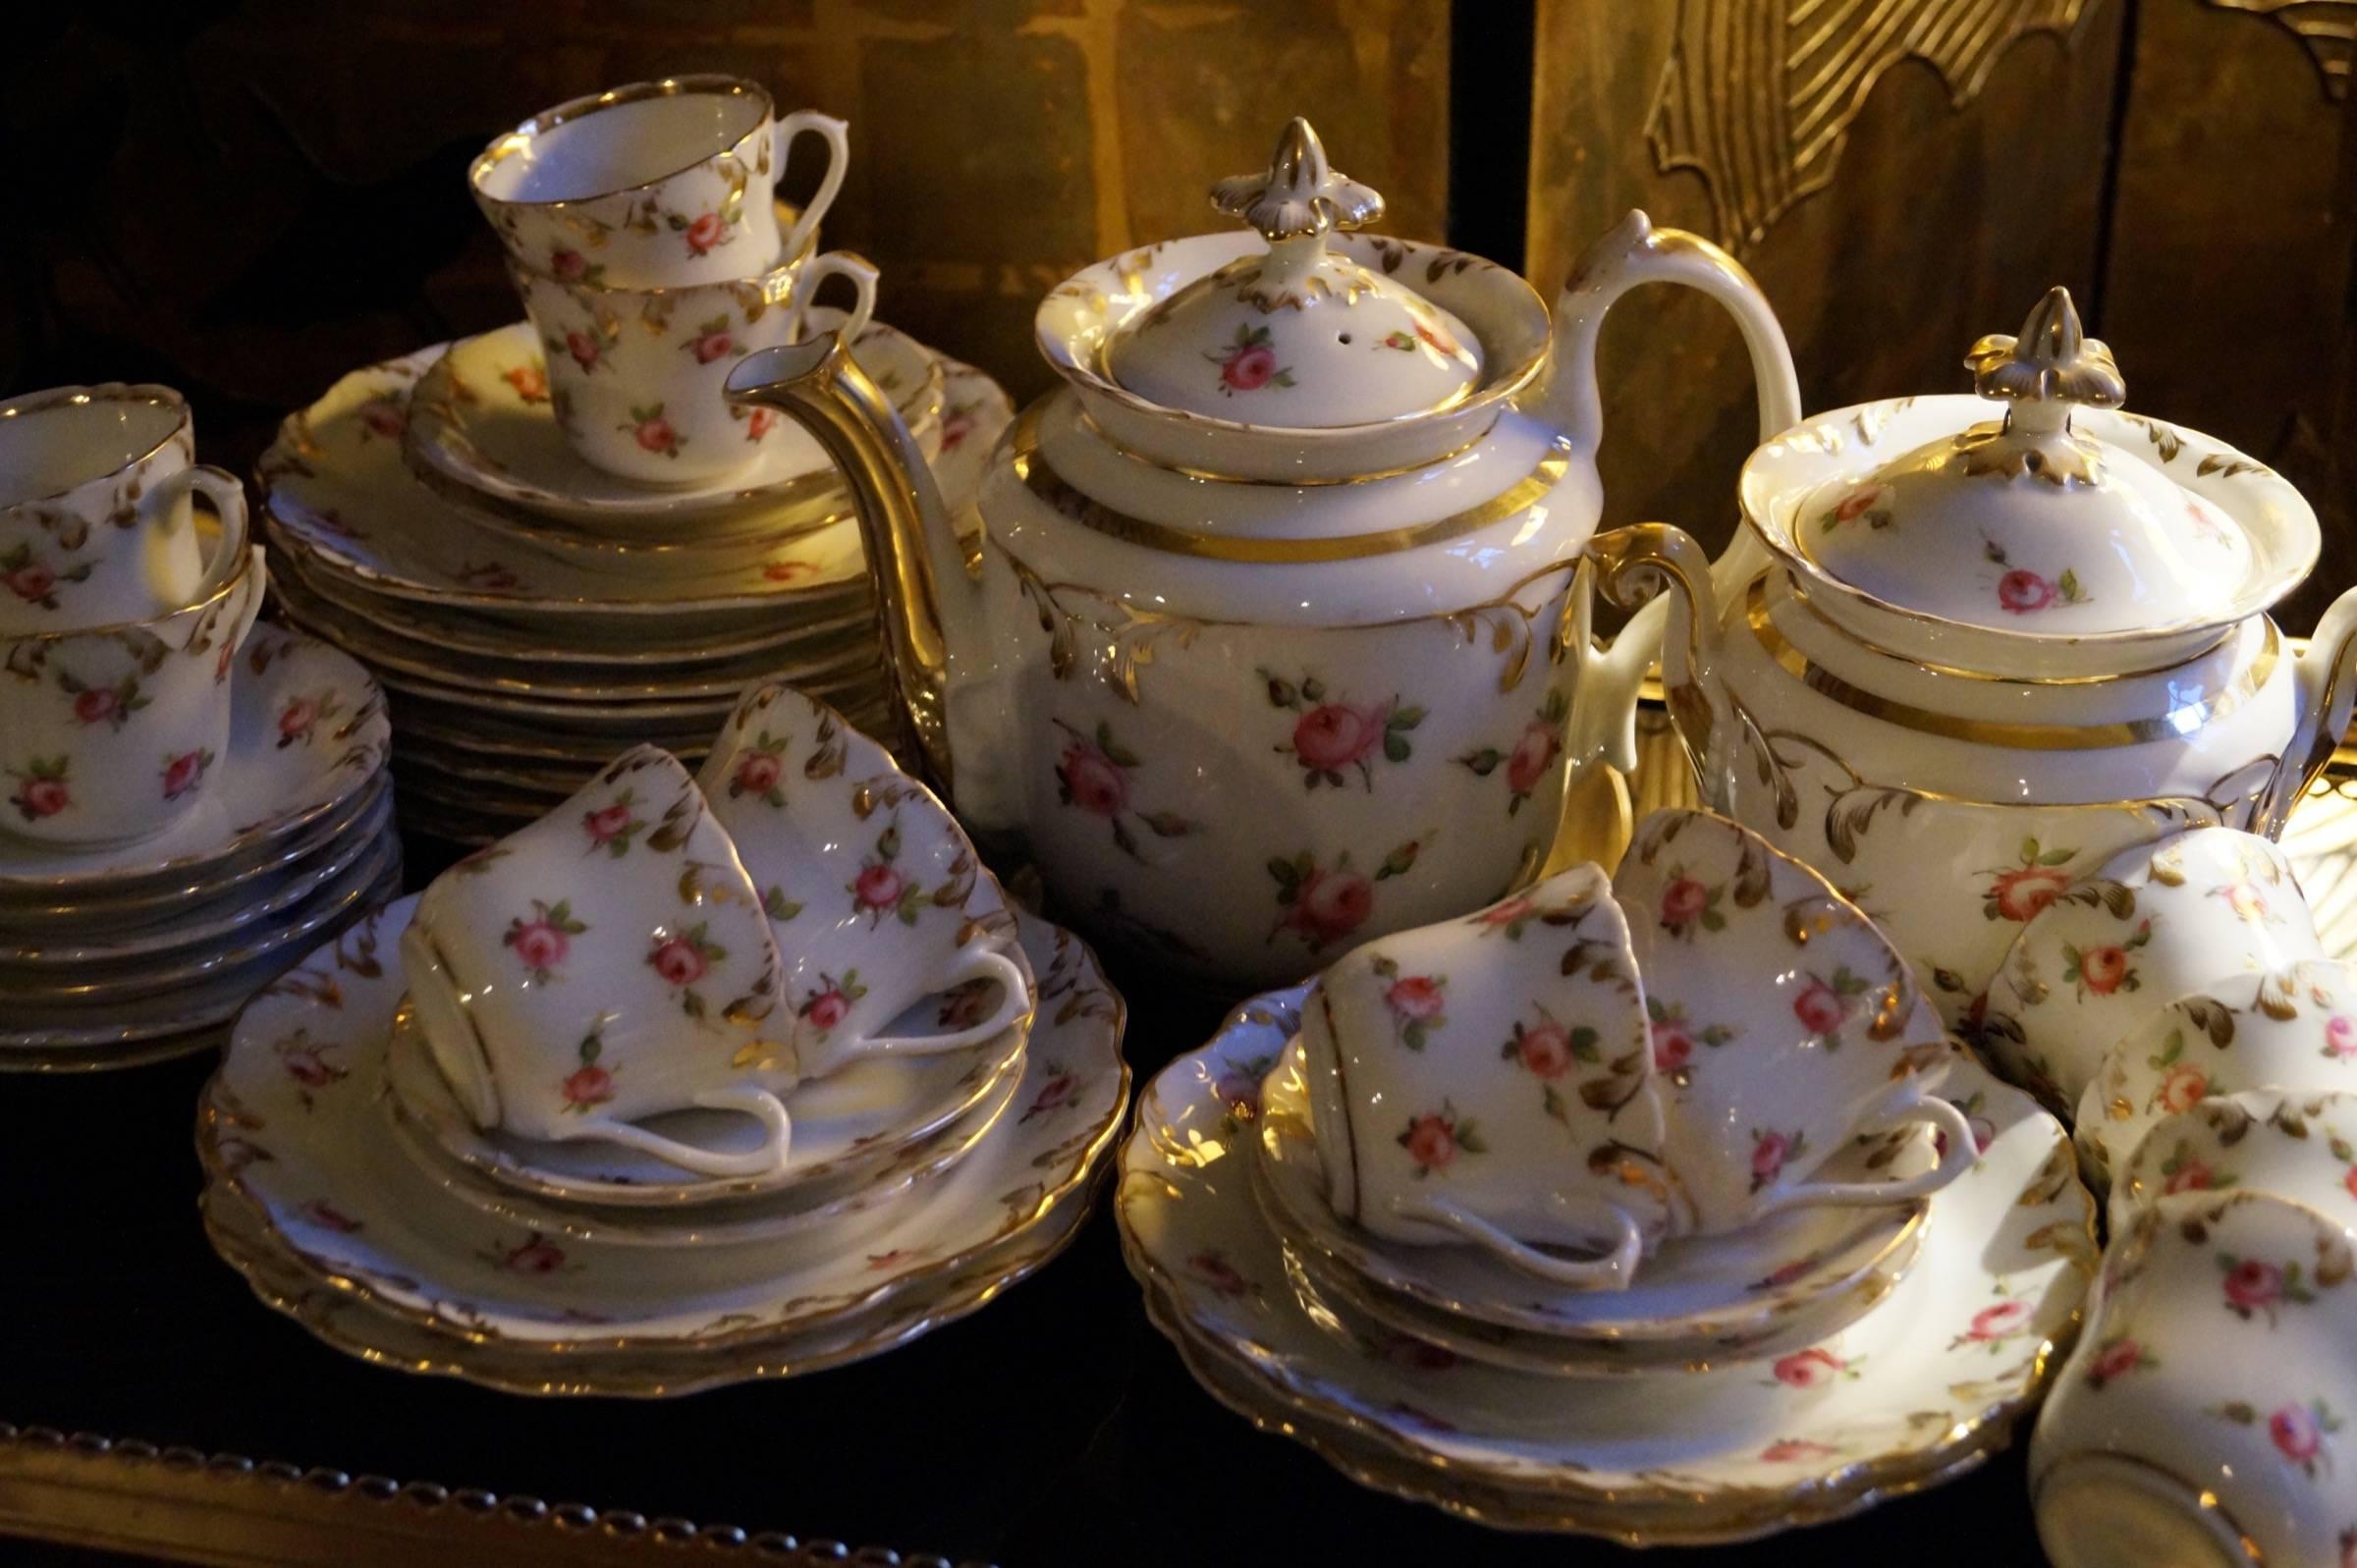 Sweet decorated tea service,
France 1850-1880.
Hand-painted with small pink roses and richly decorated with gold.
Covers tea pot and sugar pot have damage and one handle of sugar pot was restored.

Big coffee pot and tea pot.
12 plates